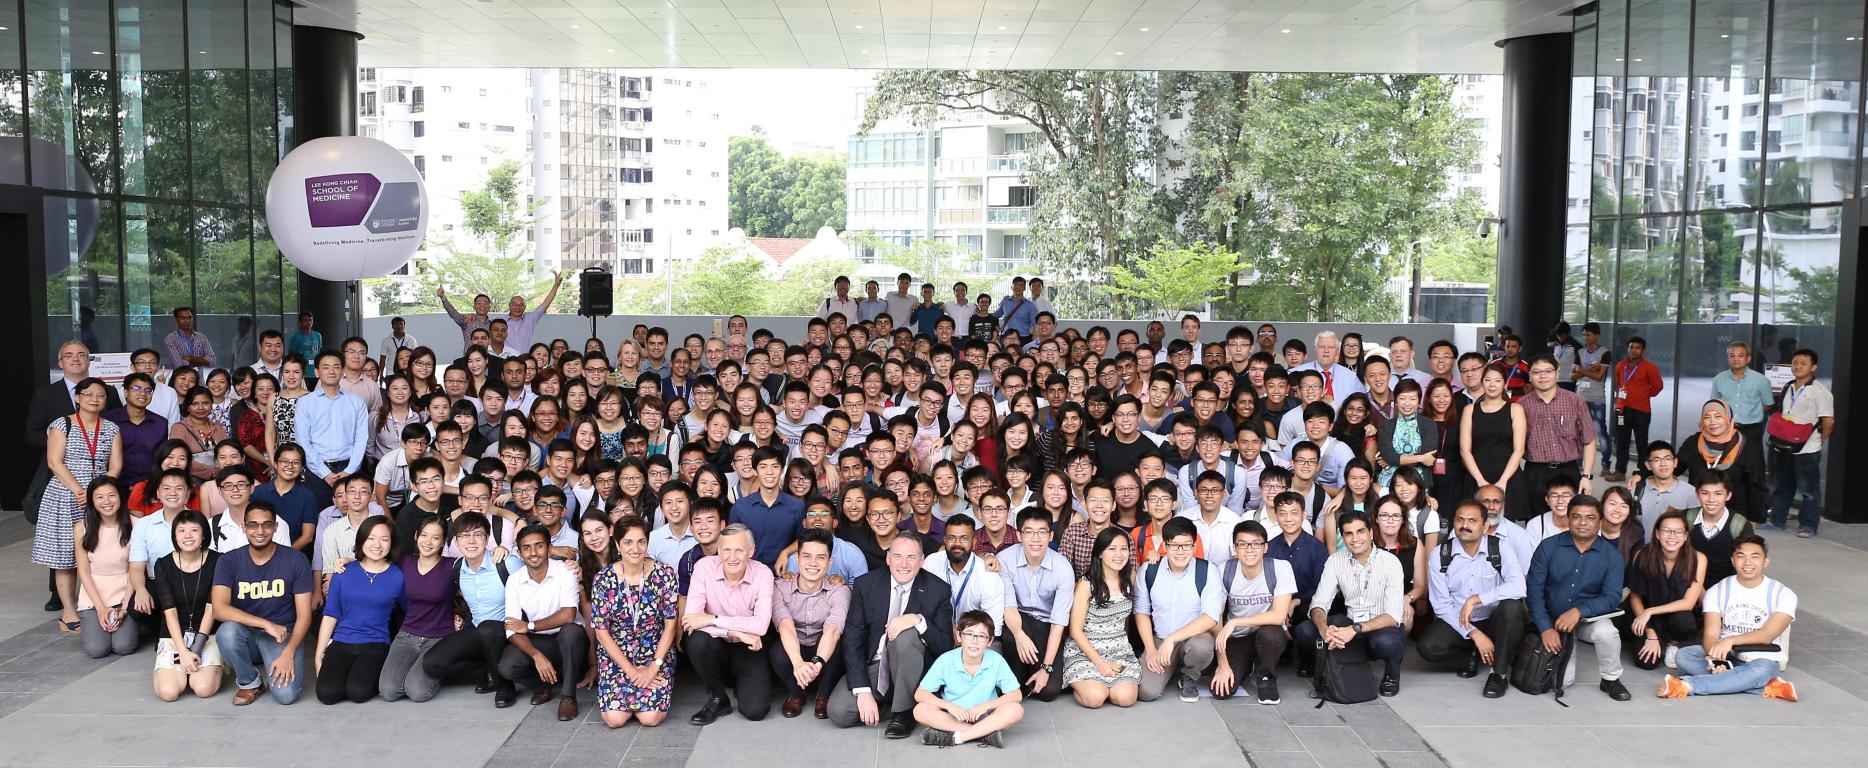 LKCMedicine staff, students and faculty gather for a group photo at CSB plaza